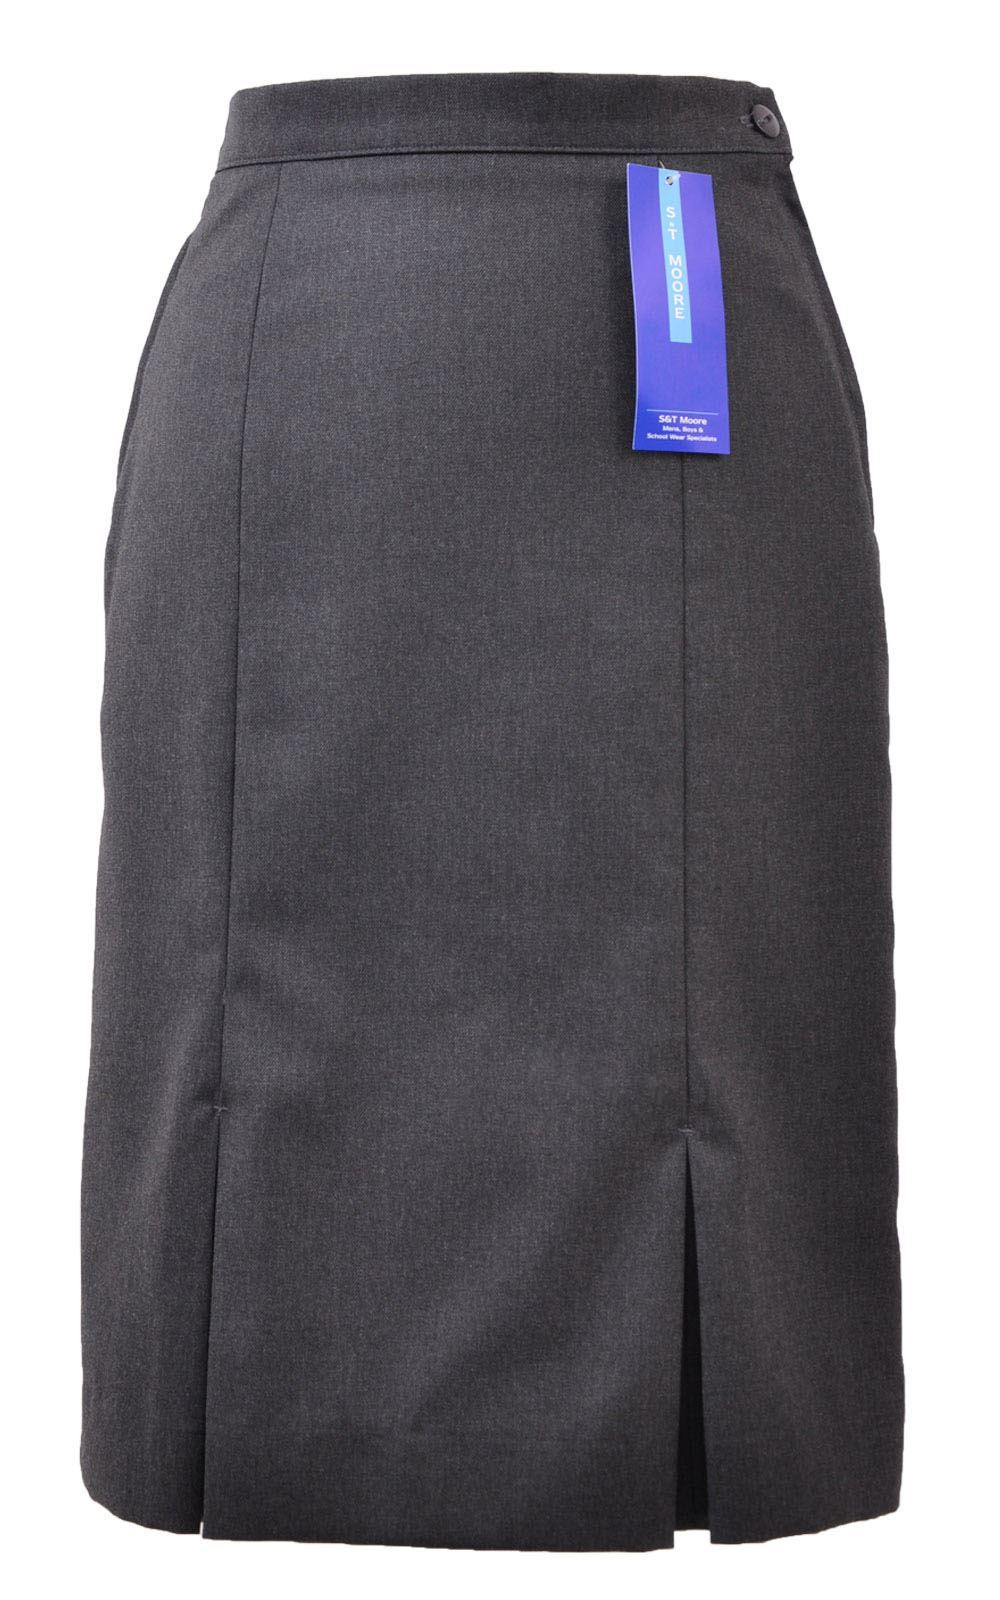 Picture of Grey Kick Pleat Skirt - S&T